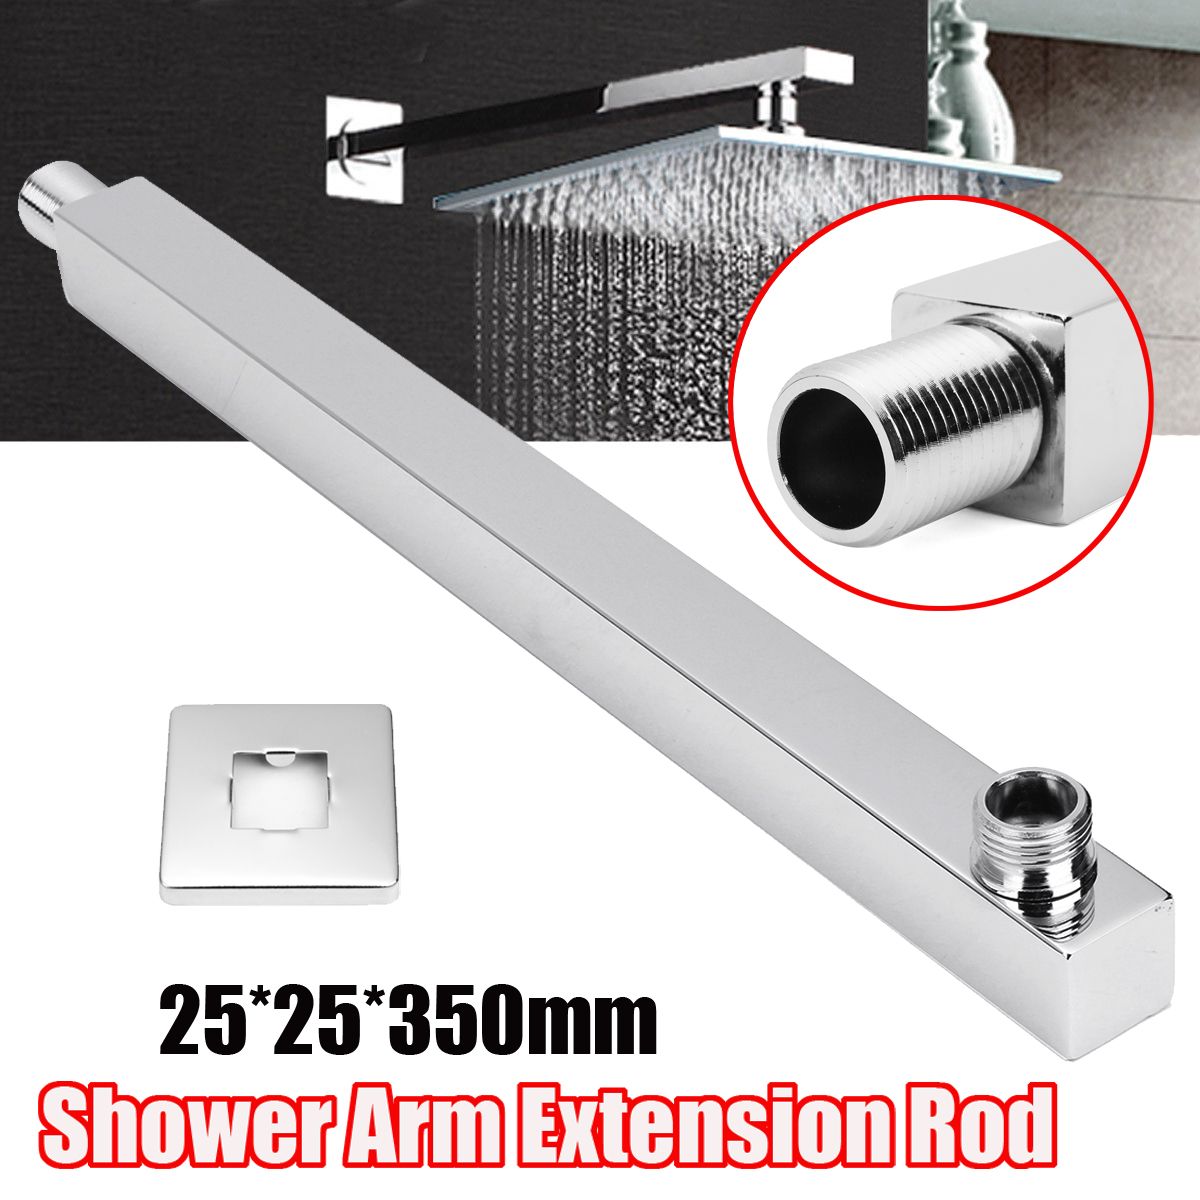 Stainless-Steel-Shower-Arm-Extension-Rod-Adjustable-Extension-Arm-for-Shower-Head-1244128